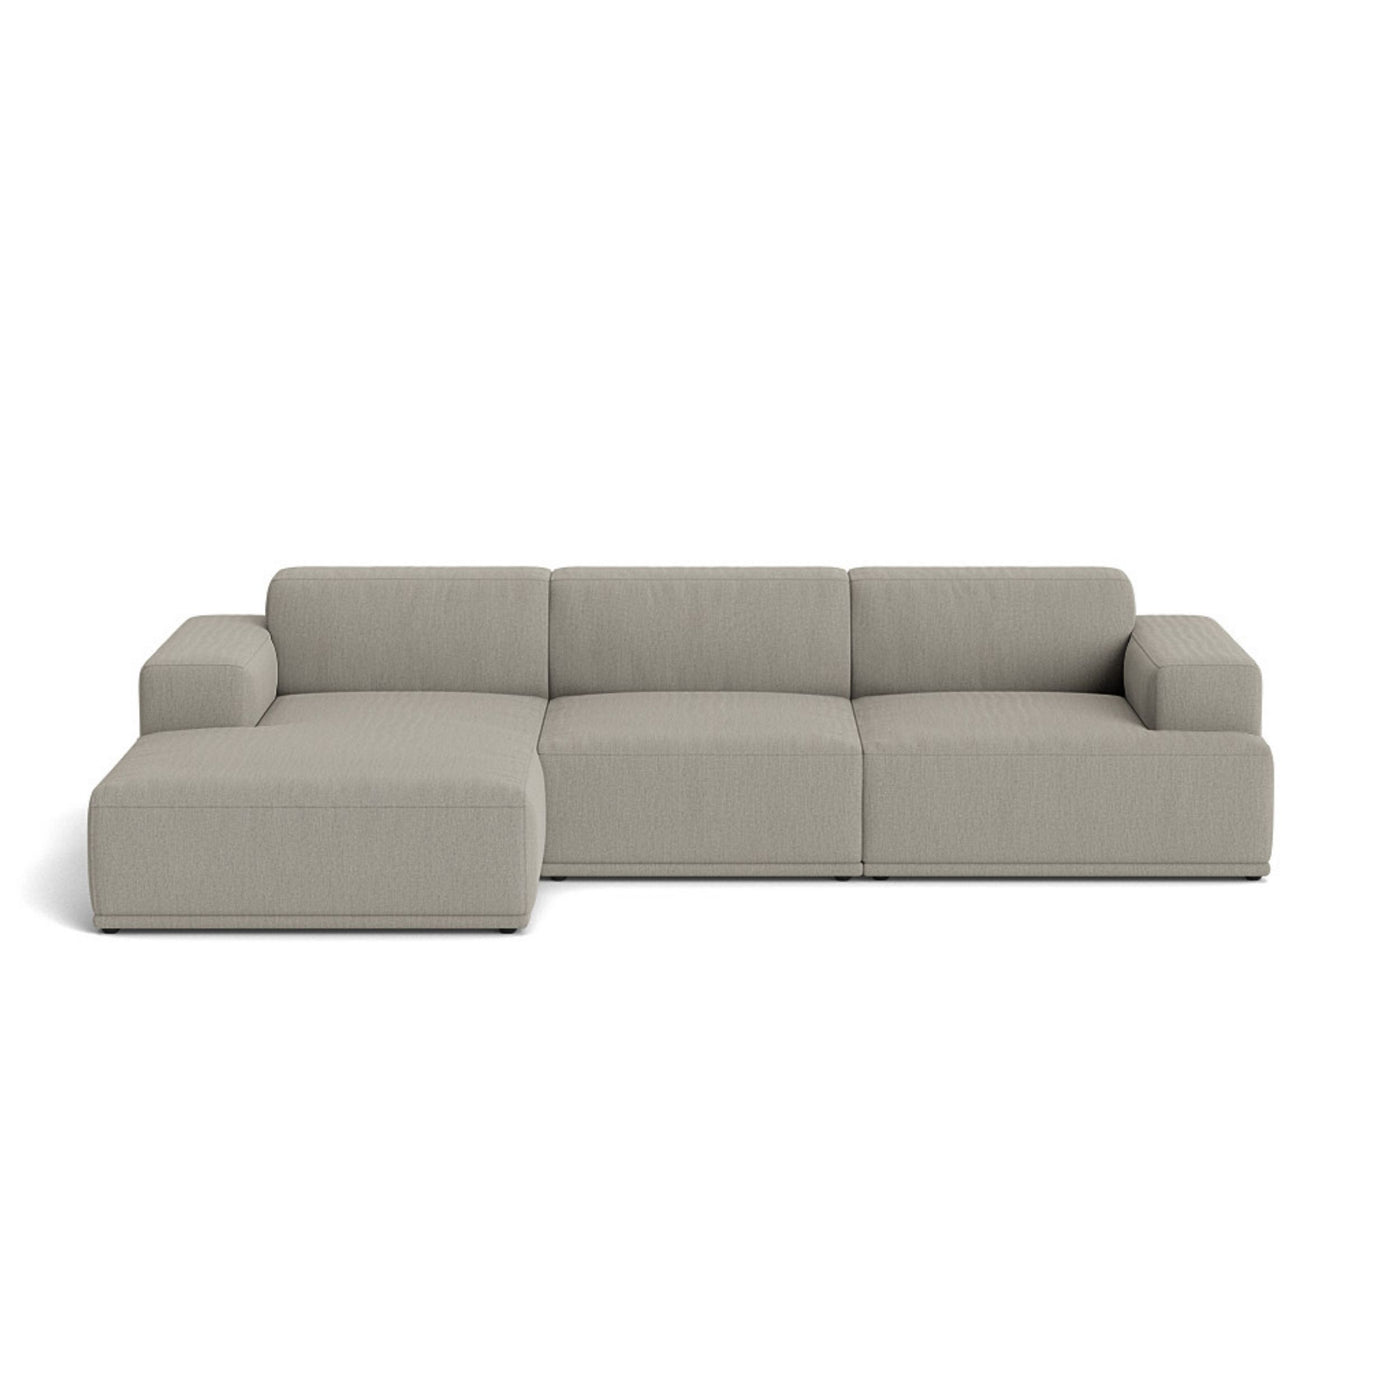 Muuto Connect Soft Modular 3 Seater Sofa, configuration 2. Made-to-order from someday designs. #colour_re-wool-218